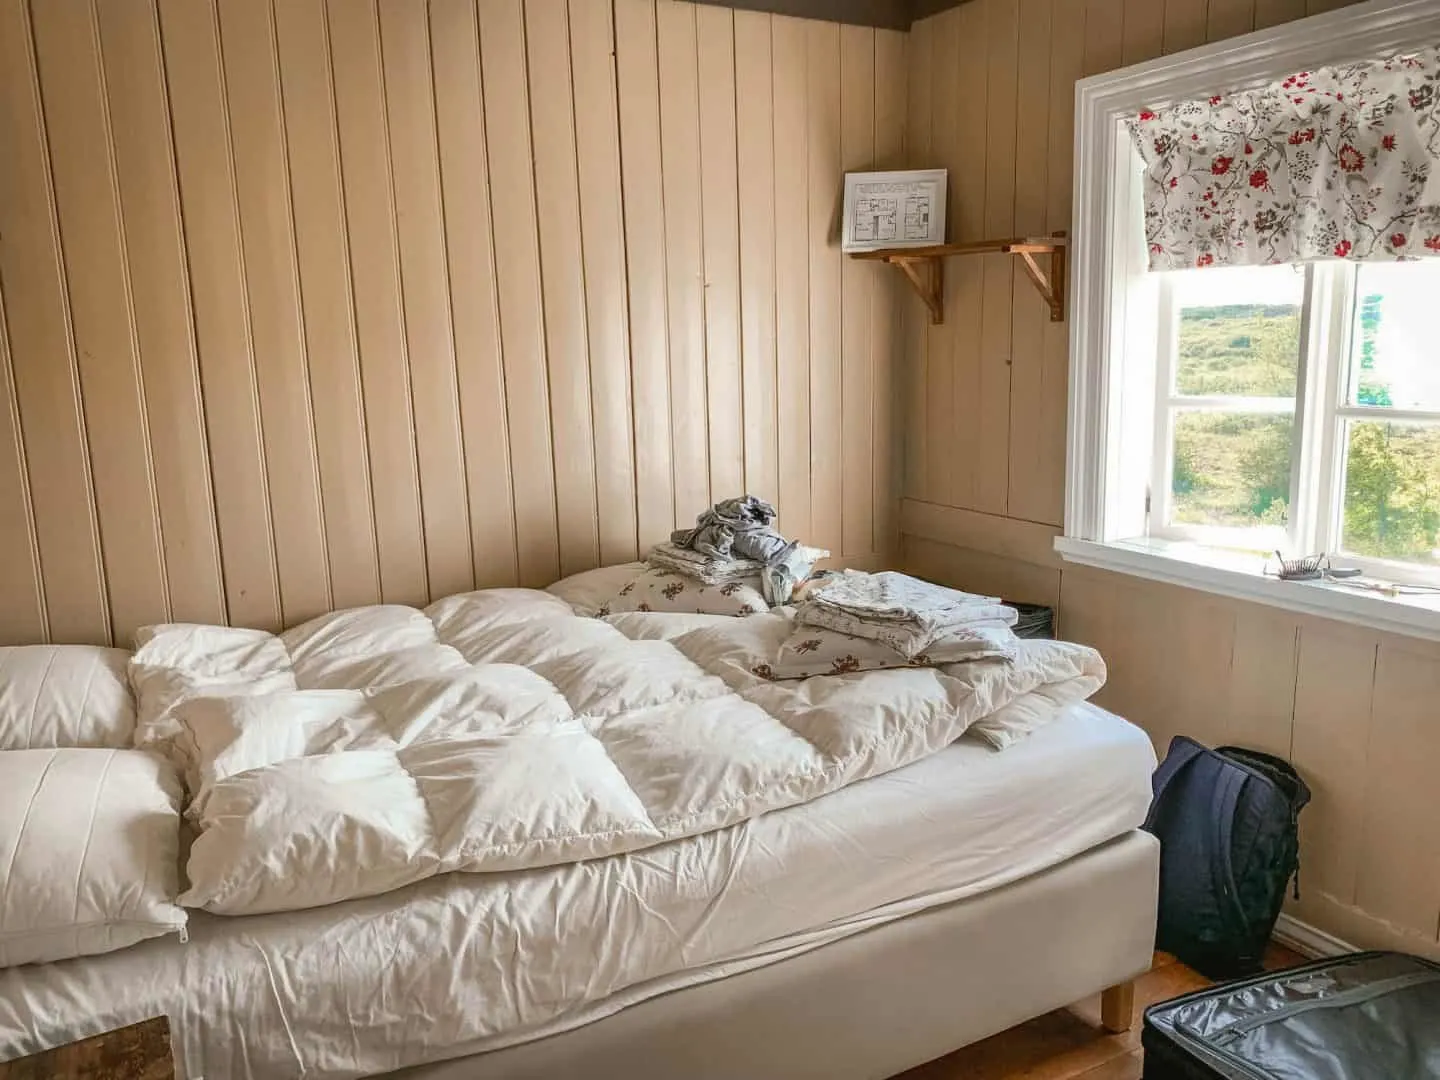 A bedroom inside a farmhouse-inspired cabin on Airbnb